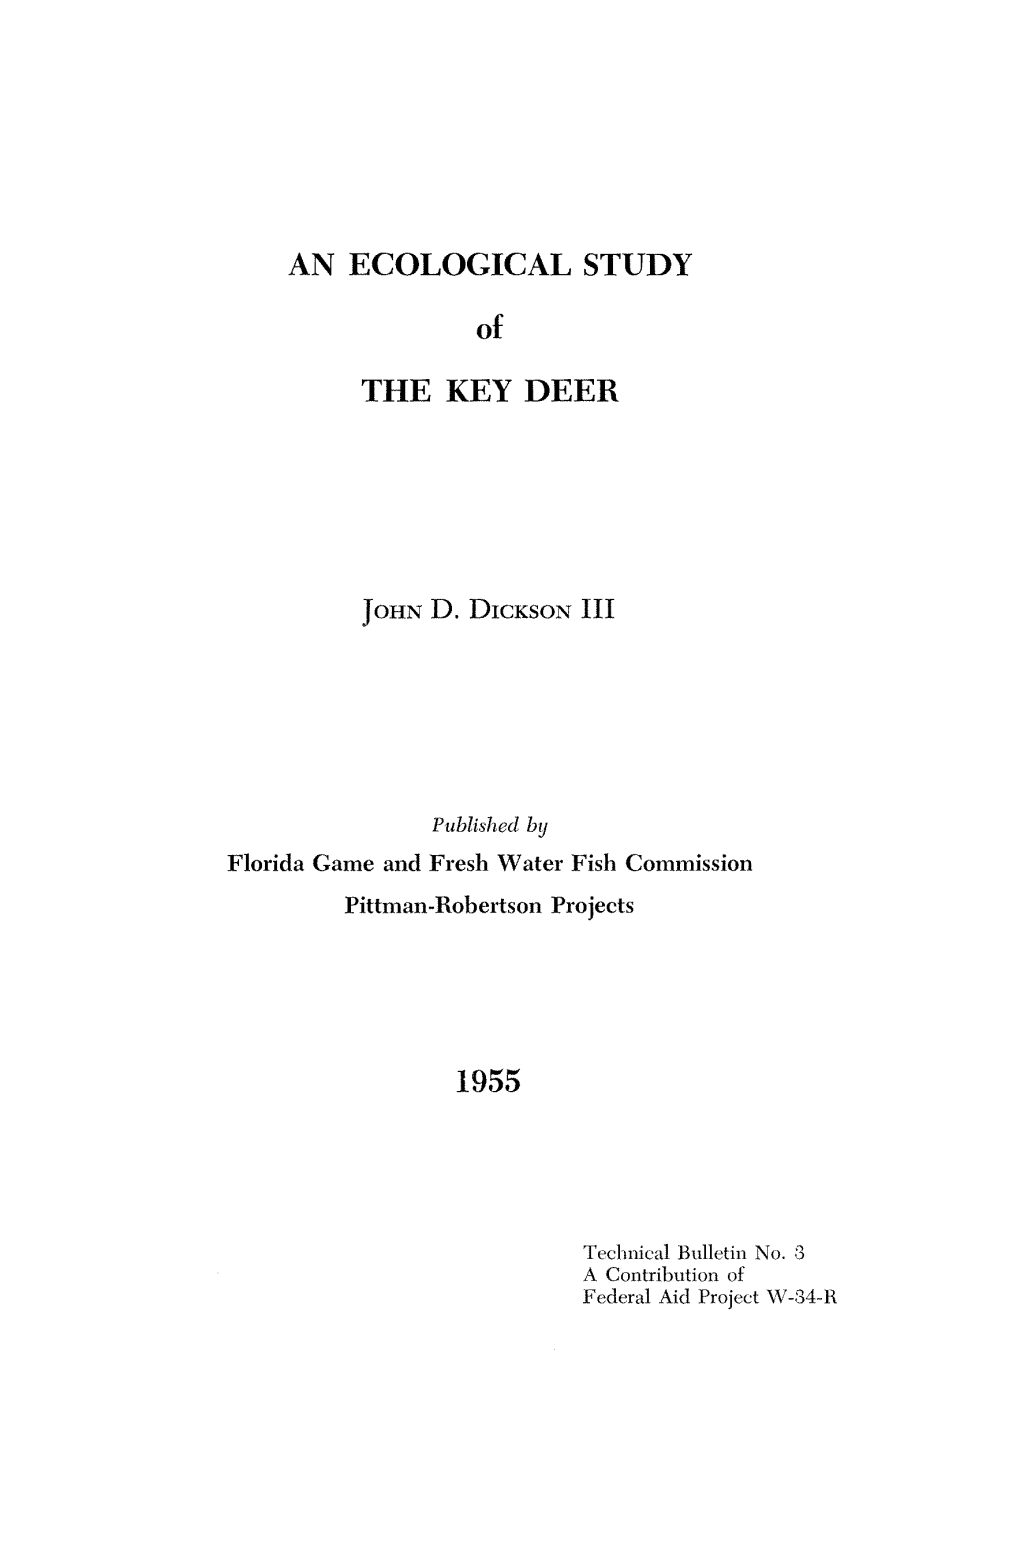 AN ECOLOGICAL STUDY of the KEY DEER